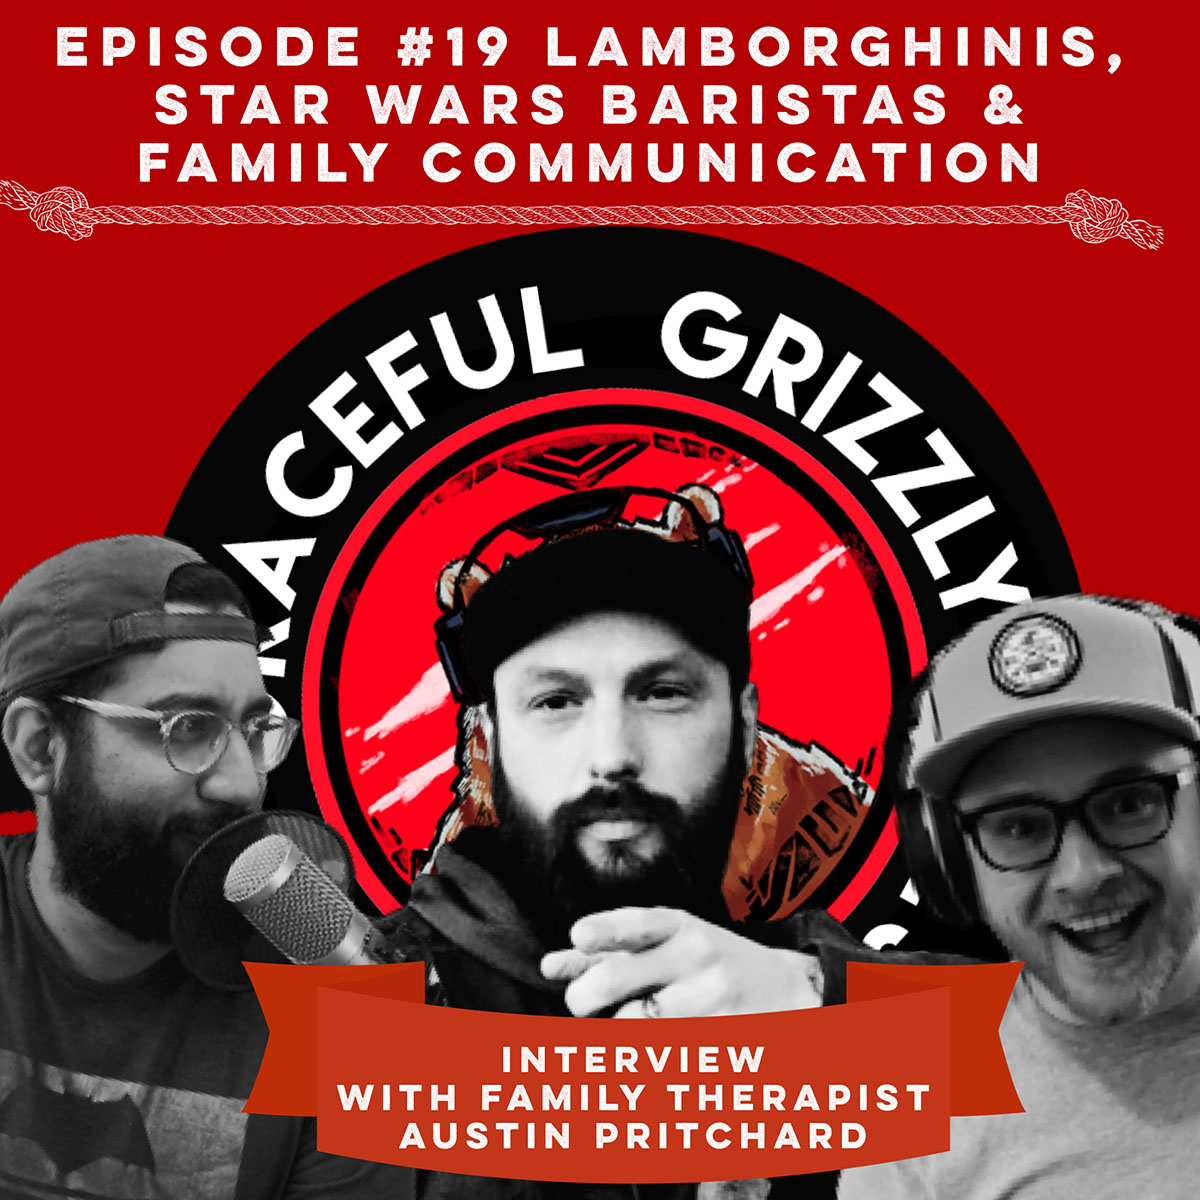 Episode 19 - Graceful Grizzly Podcast